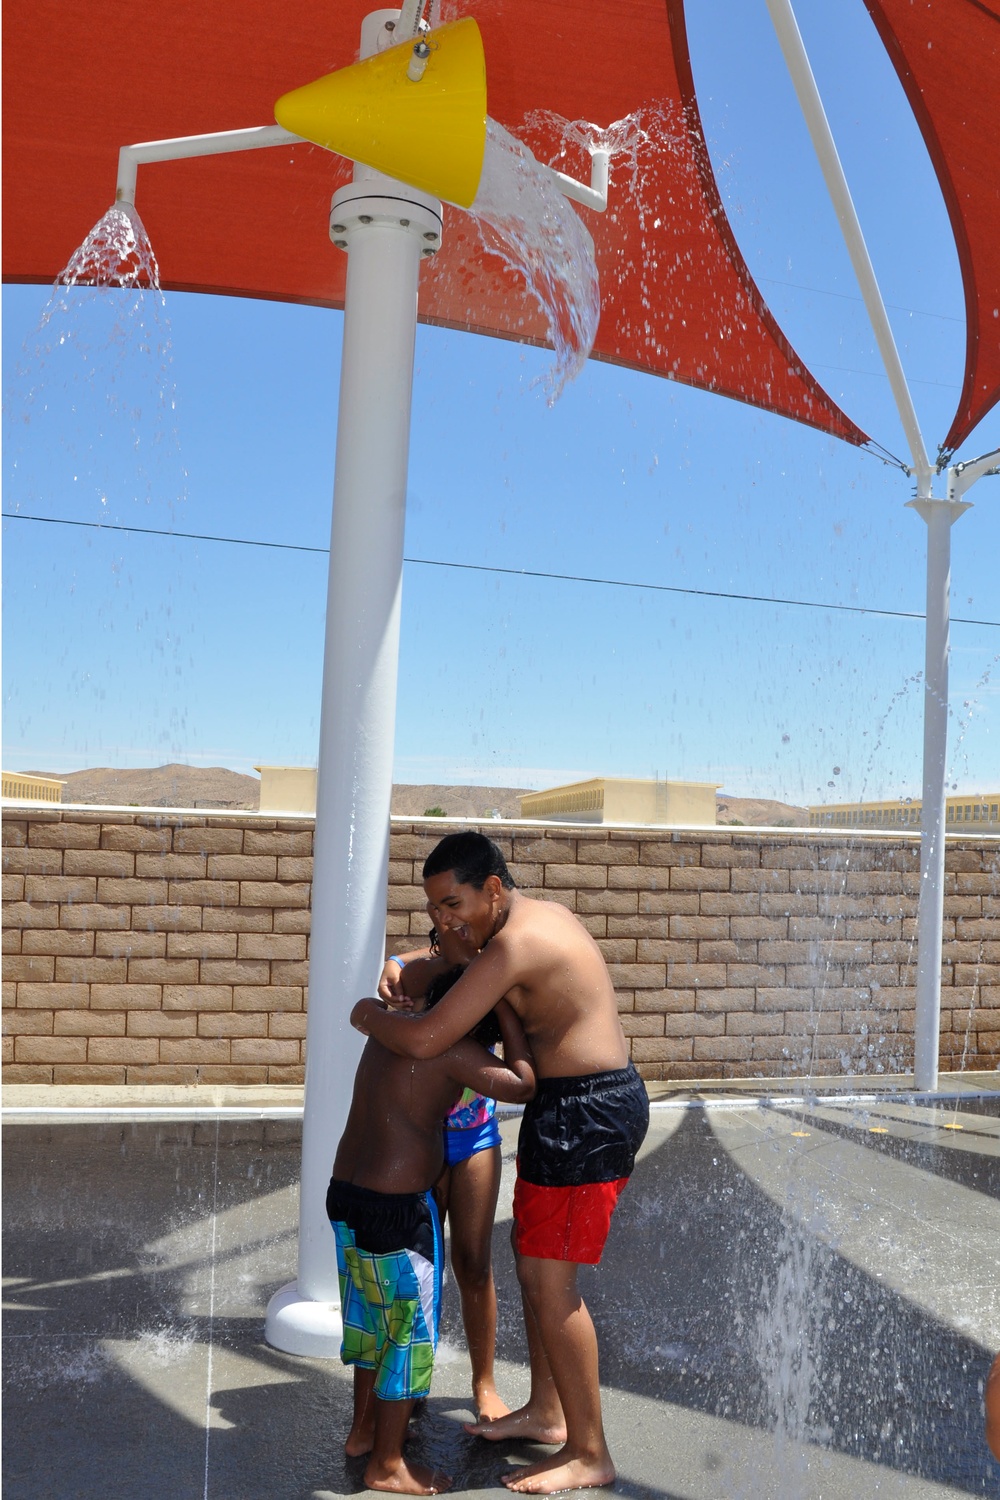 Children of military service members huddle together in anticipation of a bucket of water about to douse them at the Oasis Pool and Water Park aboard Marine Corps Logistics Base Barstow, Calif., during the All American BBQ, July 4